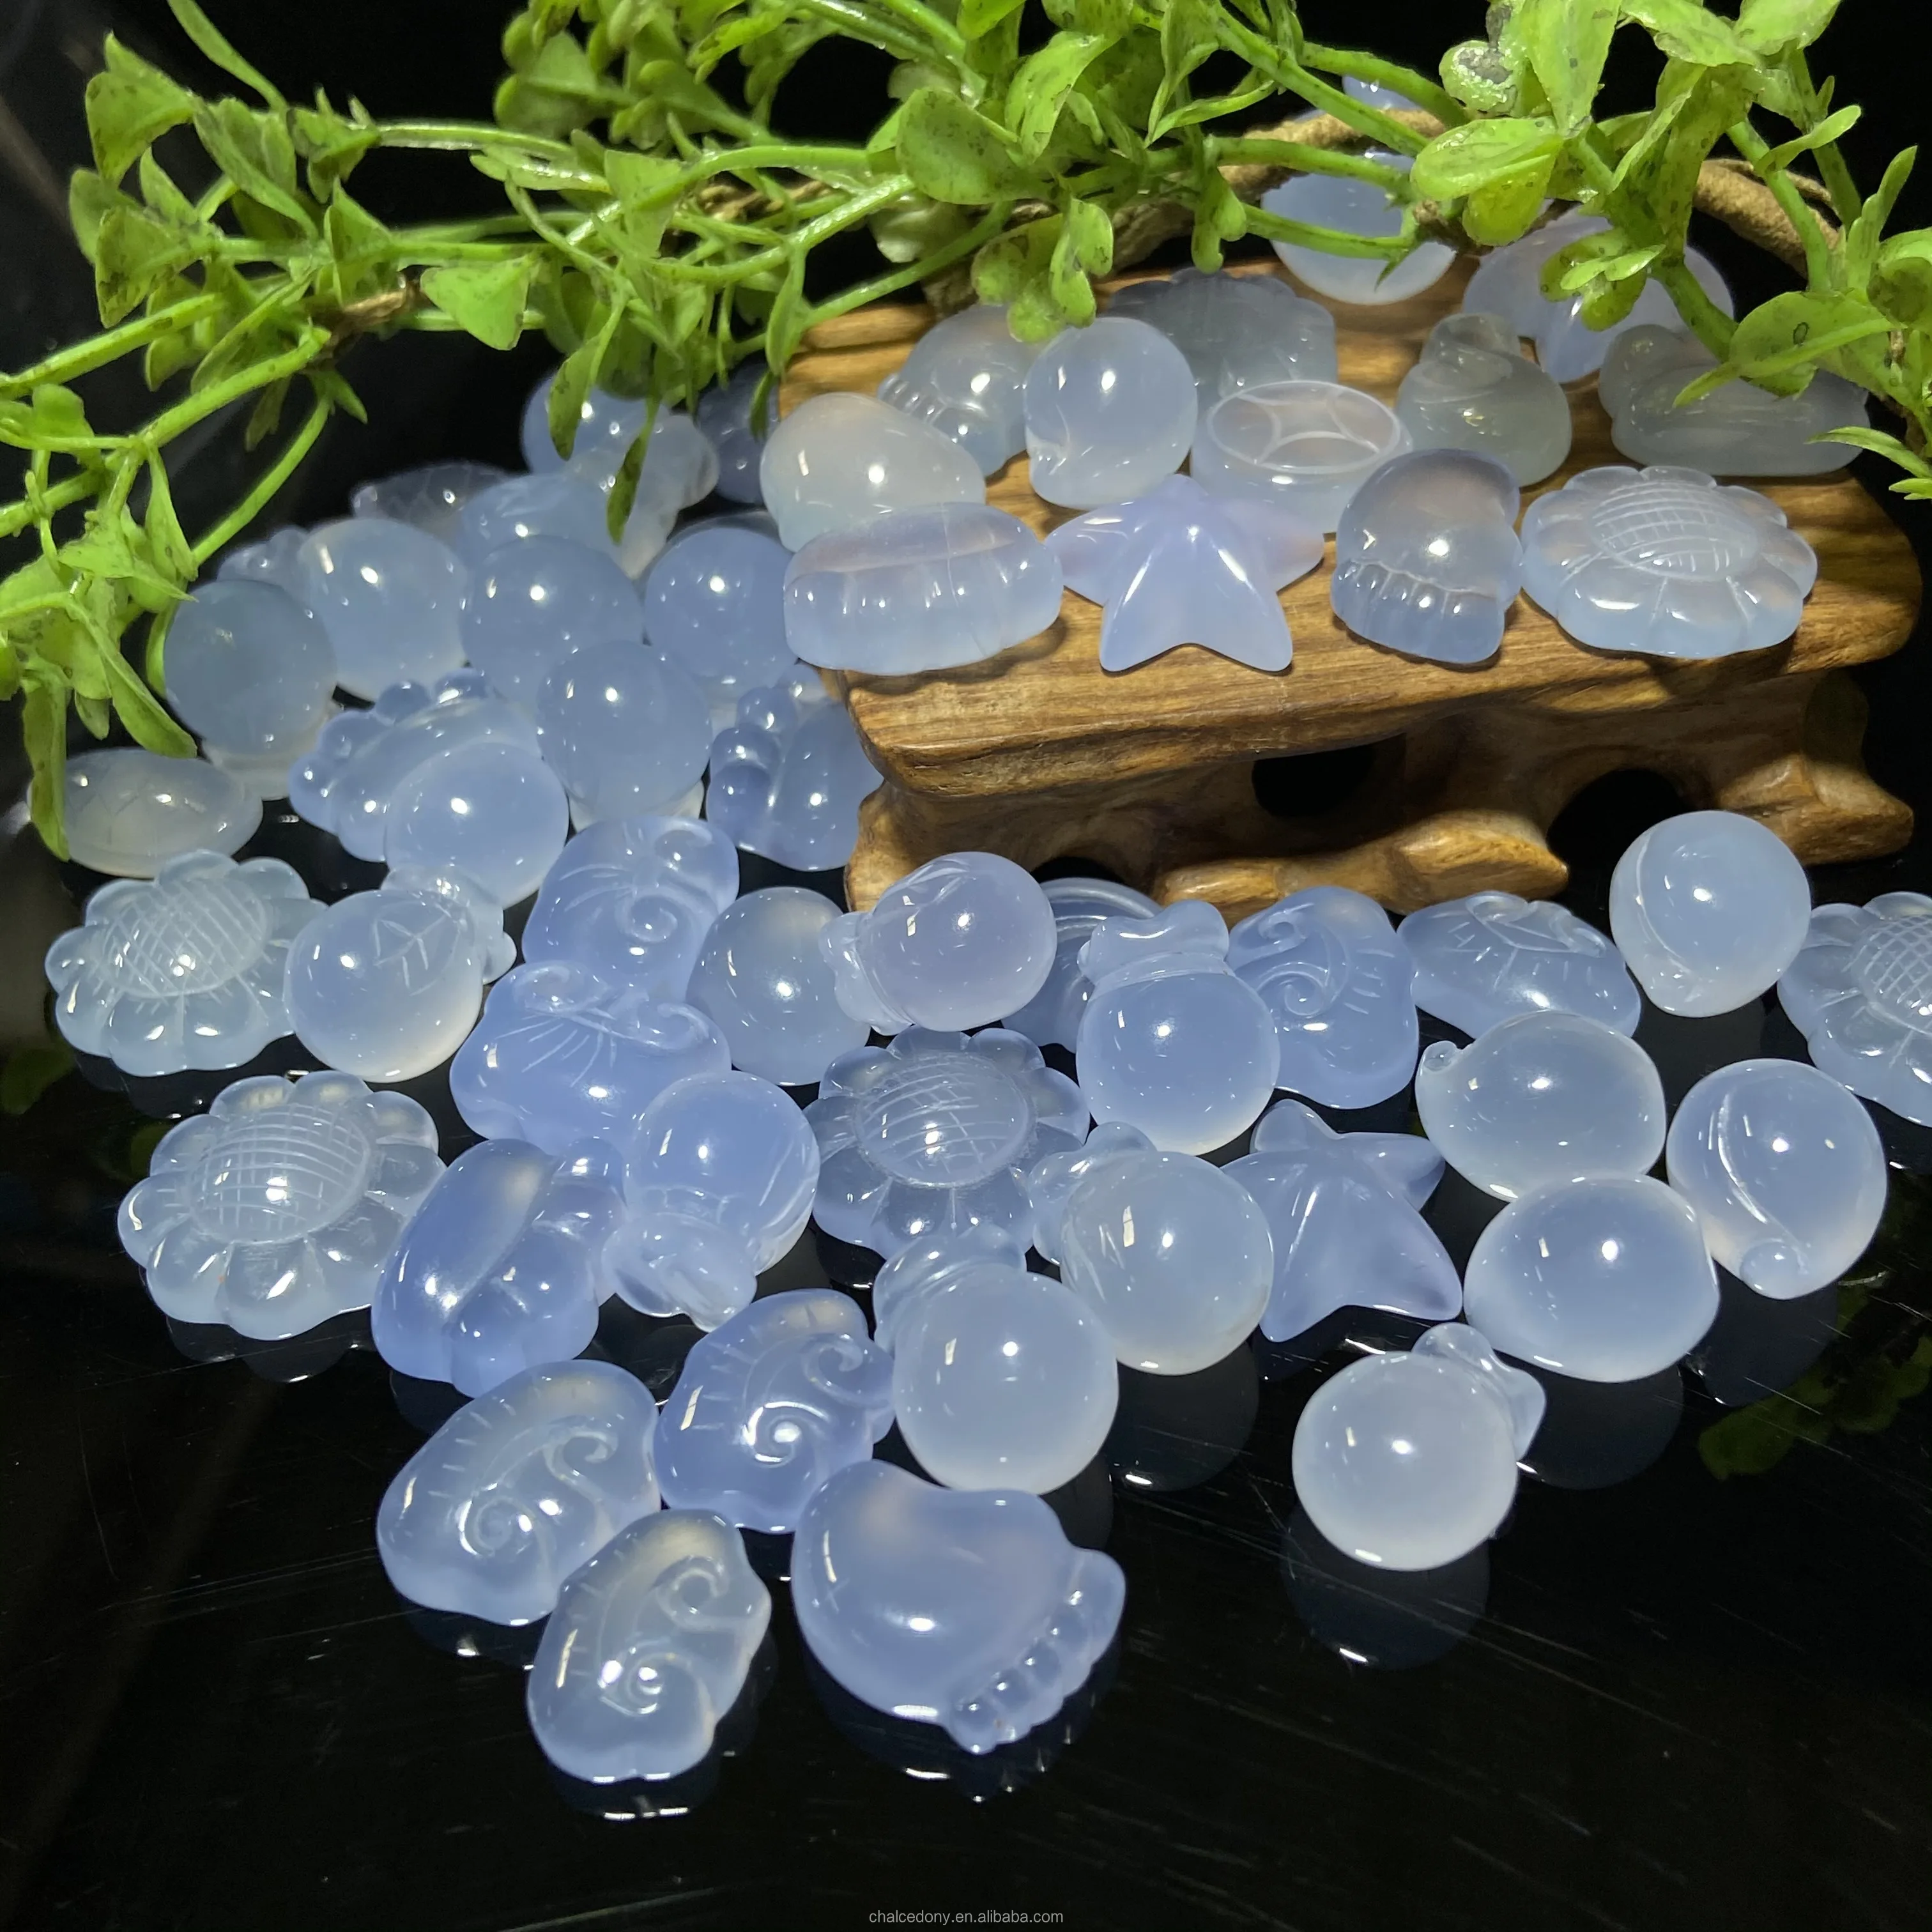 

Wholesale Bulk Jewelry Making agate Charms Mixed shape Gemstone DIY for Necklace Bracelet Jewelry Making and Crafting, Natural blue